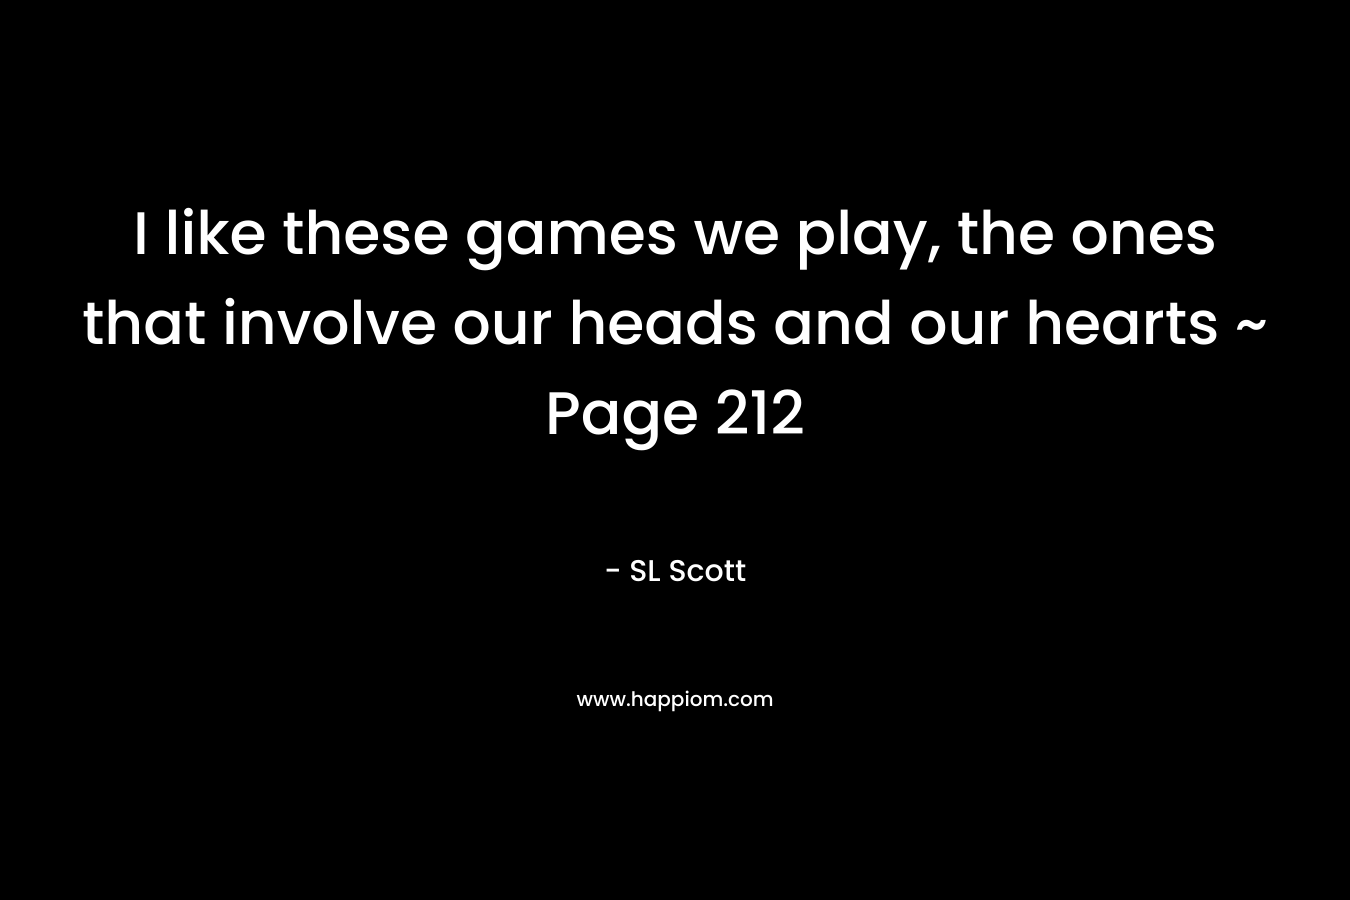 I like these games we play, the ones that involve our heads and our hearts ~ Page 212